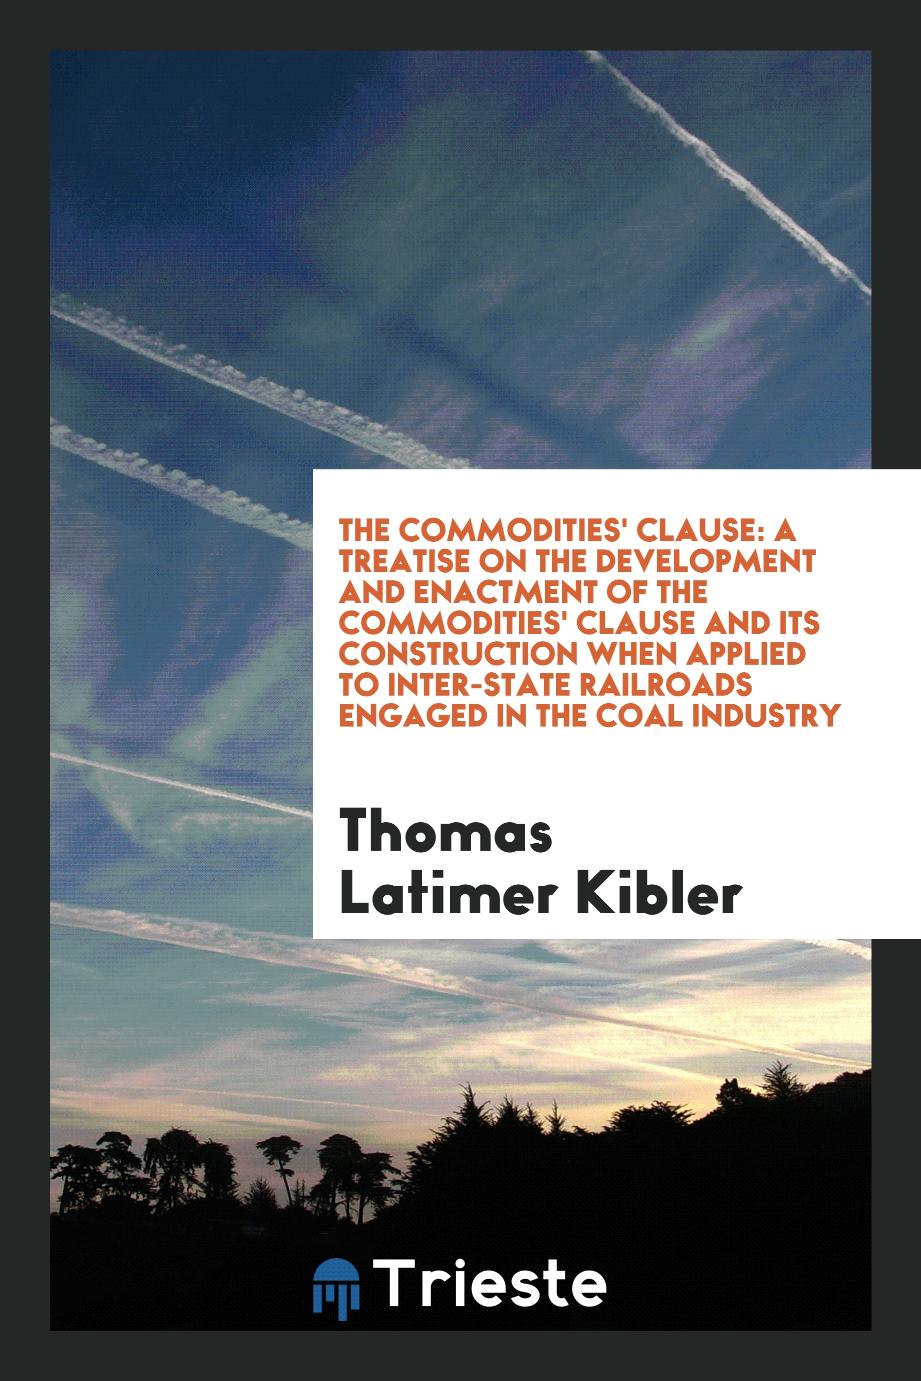 The Commodities' Clause: A Treatise on the Development and Enactment of the Commodities' Clause and Its Construction When Applied to Inter-State Railroads Engaged in the Coal Industry